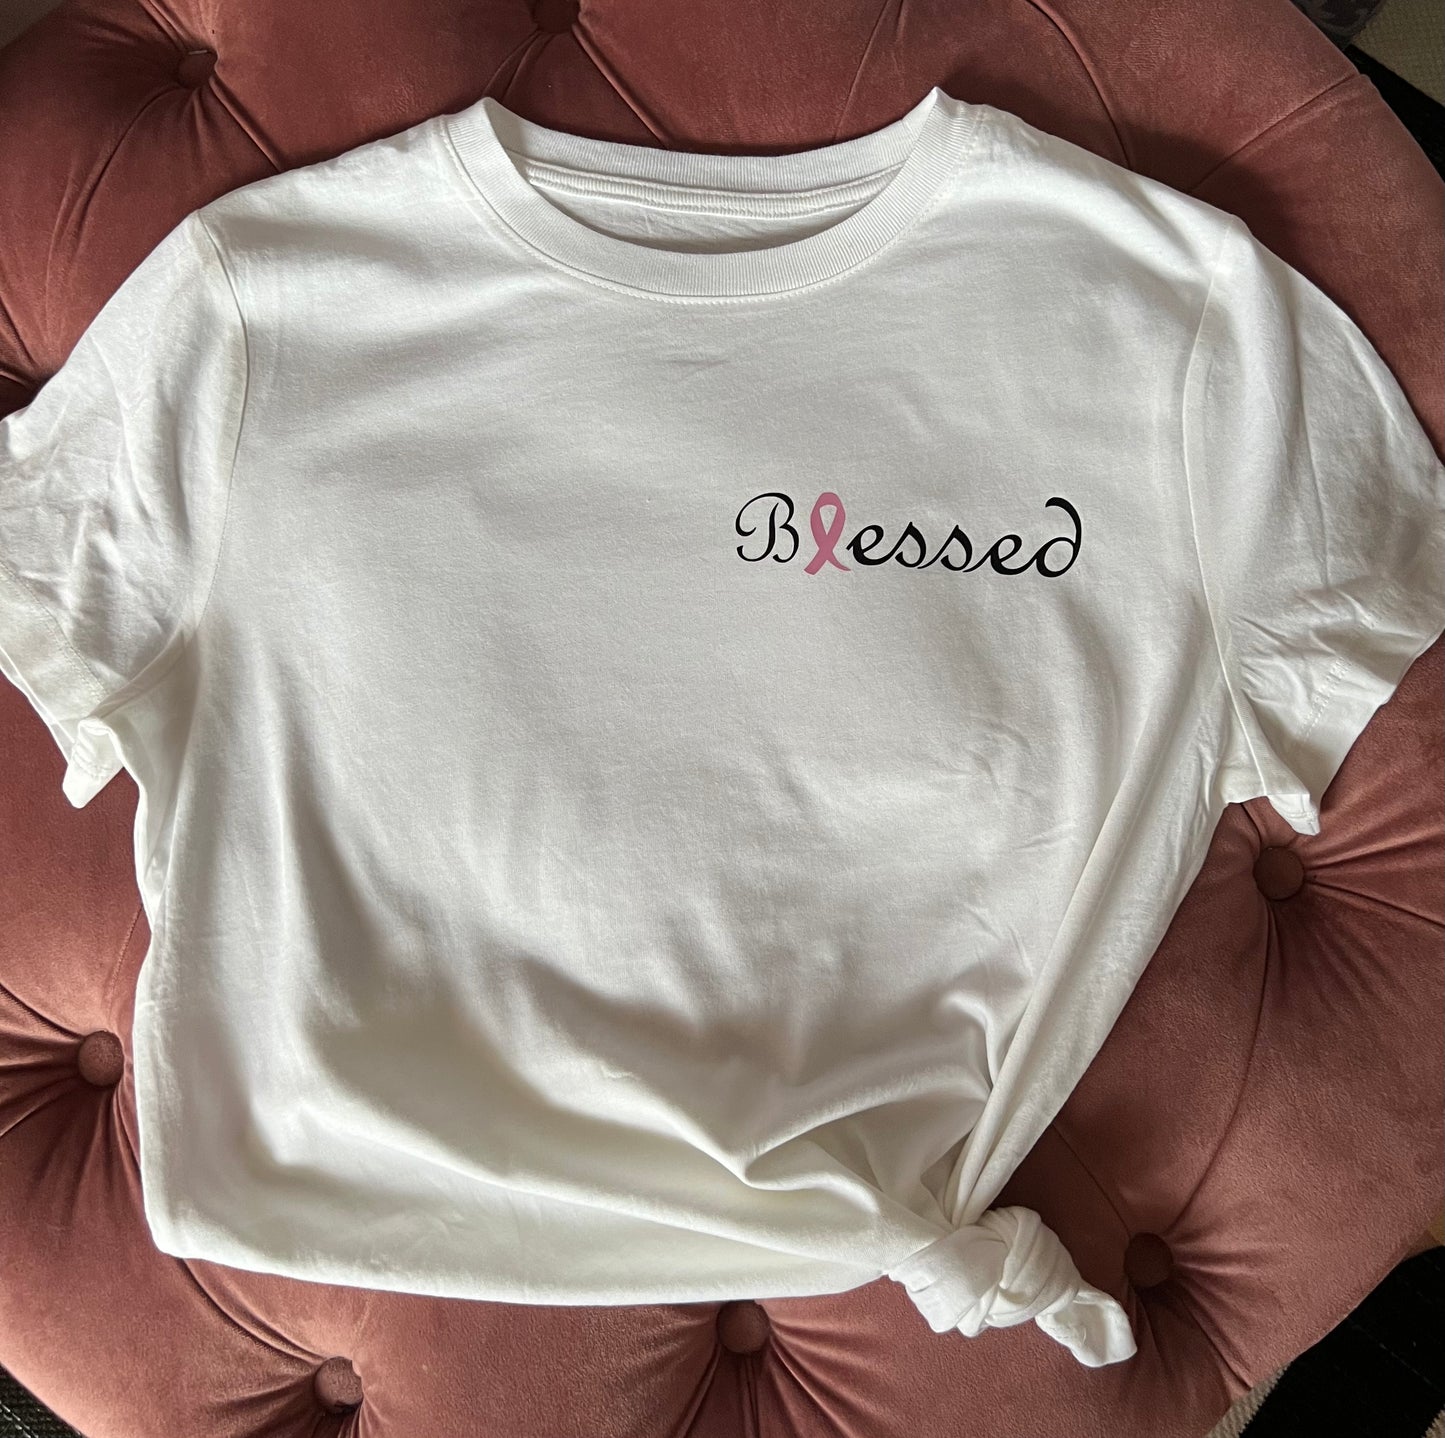 BLESSED Breast Cancer women’s short sleeve t-shirt